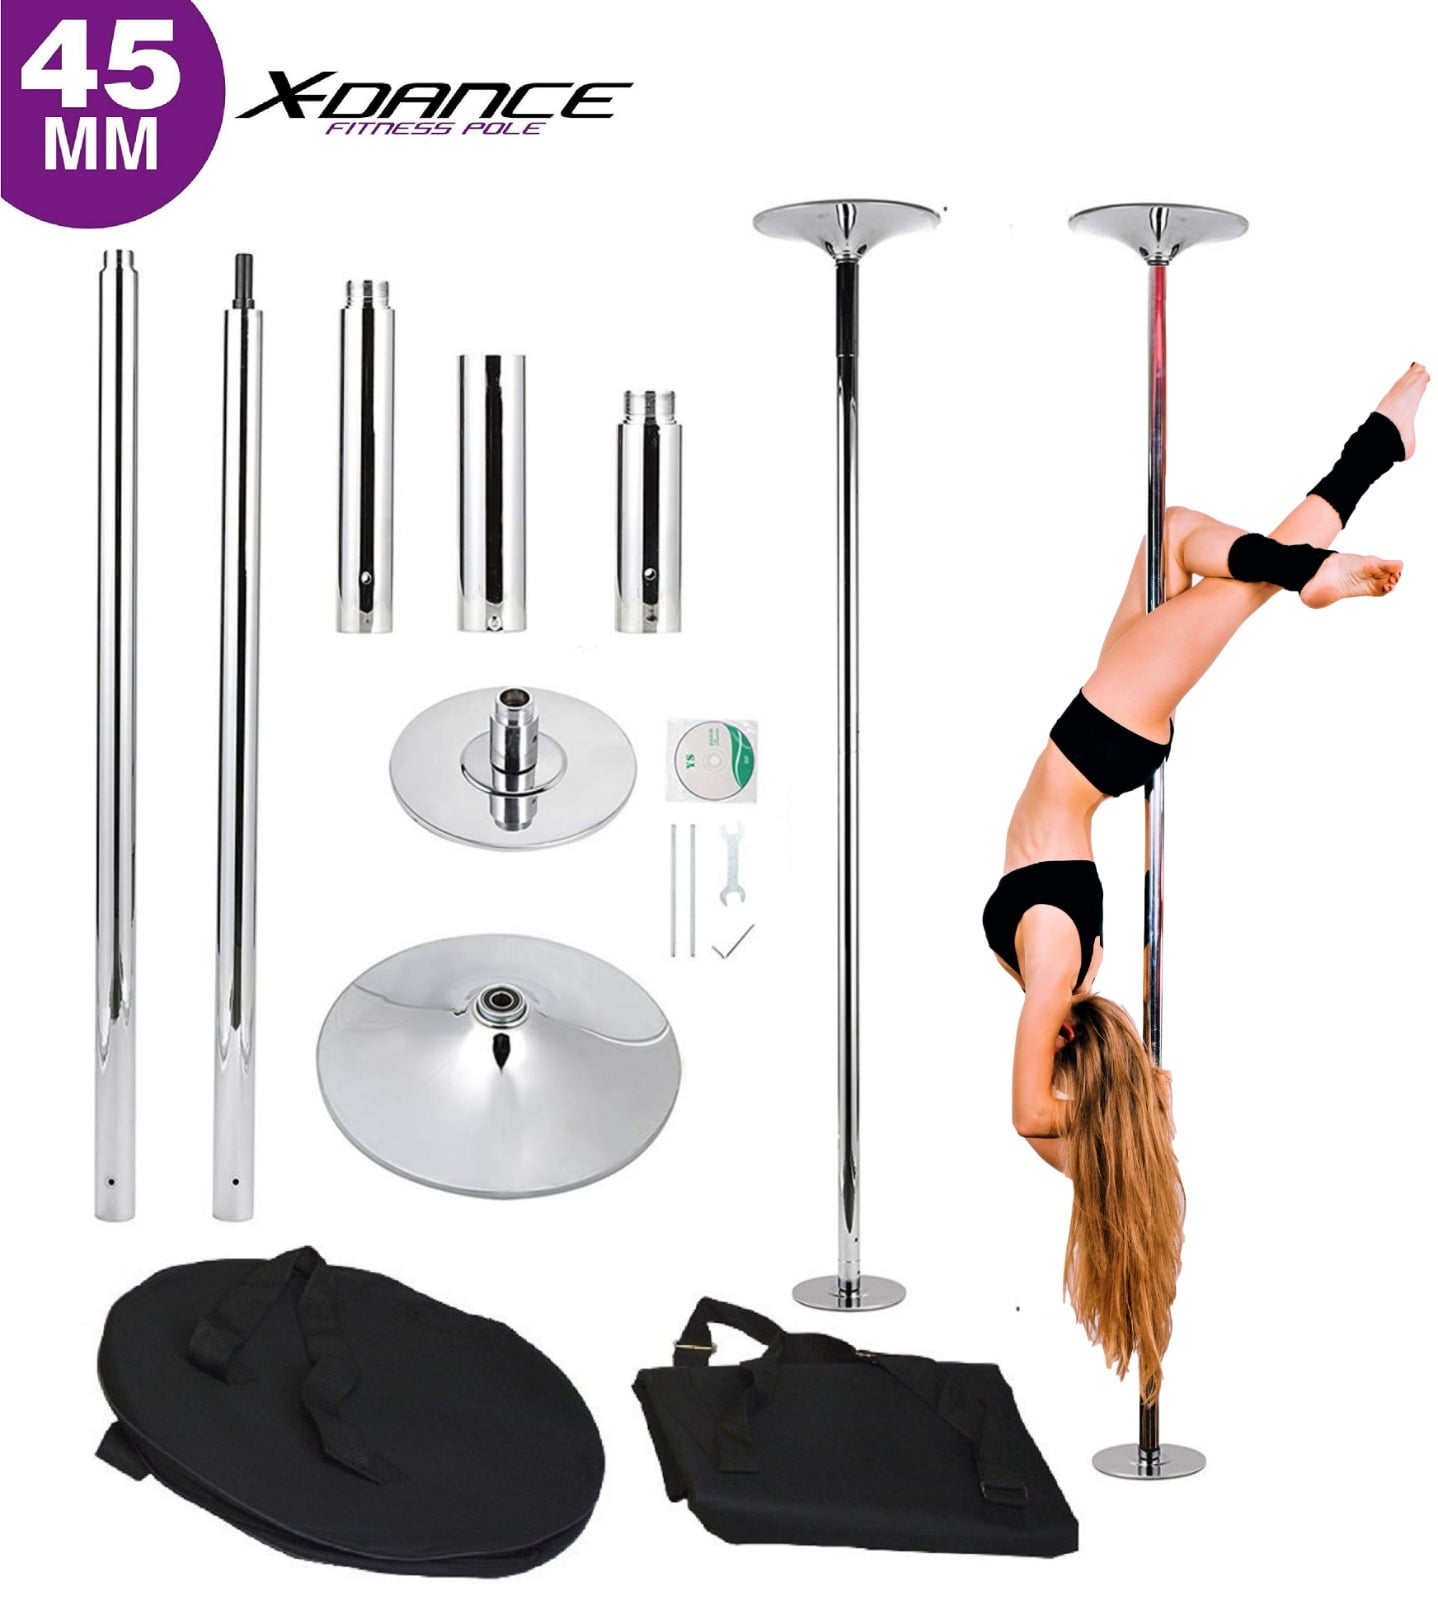 Silver-Flying Pole PRIOR FITNESS 45mm Removable Dance Pole Set Spinning Pole Dance Portable Static Fitness Dancing Pole Kit for Exercise Club Party Pub Home 